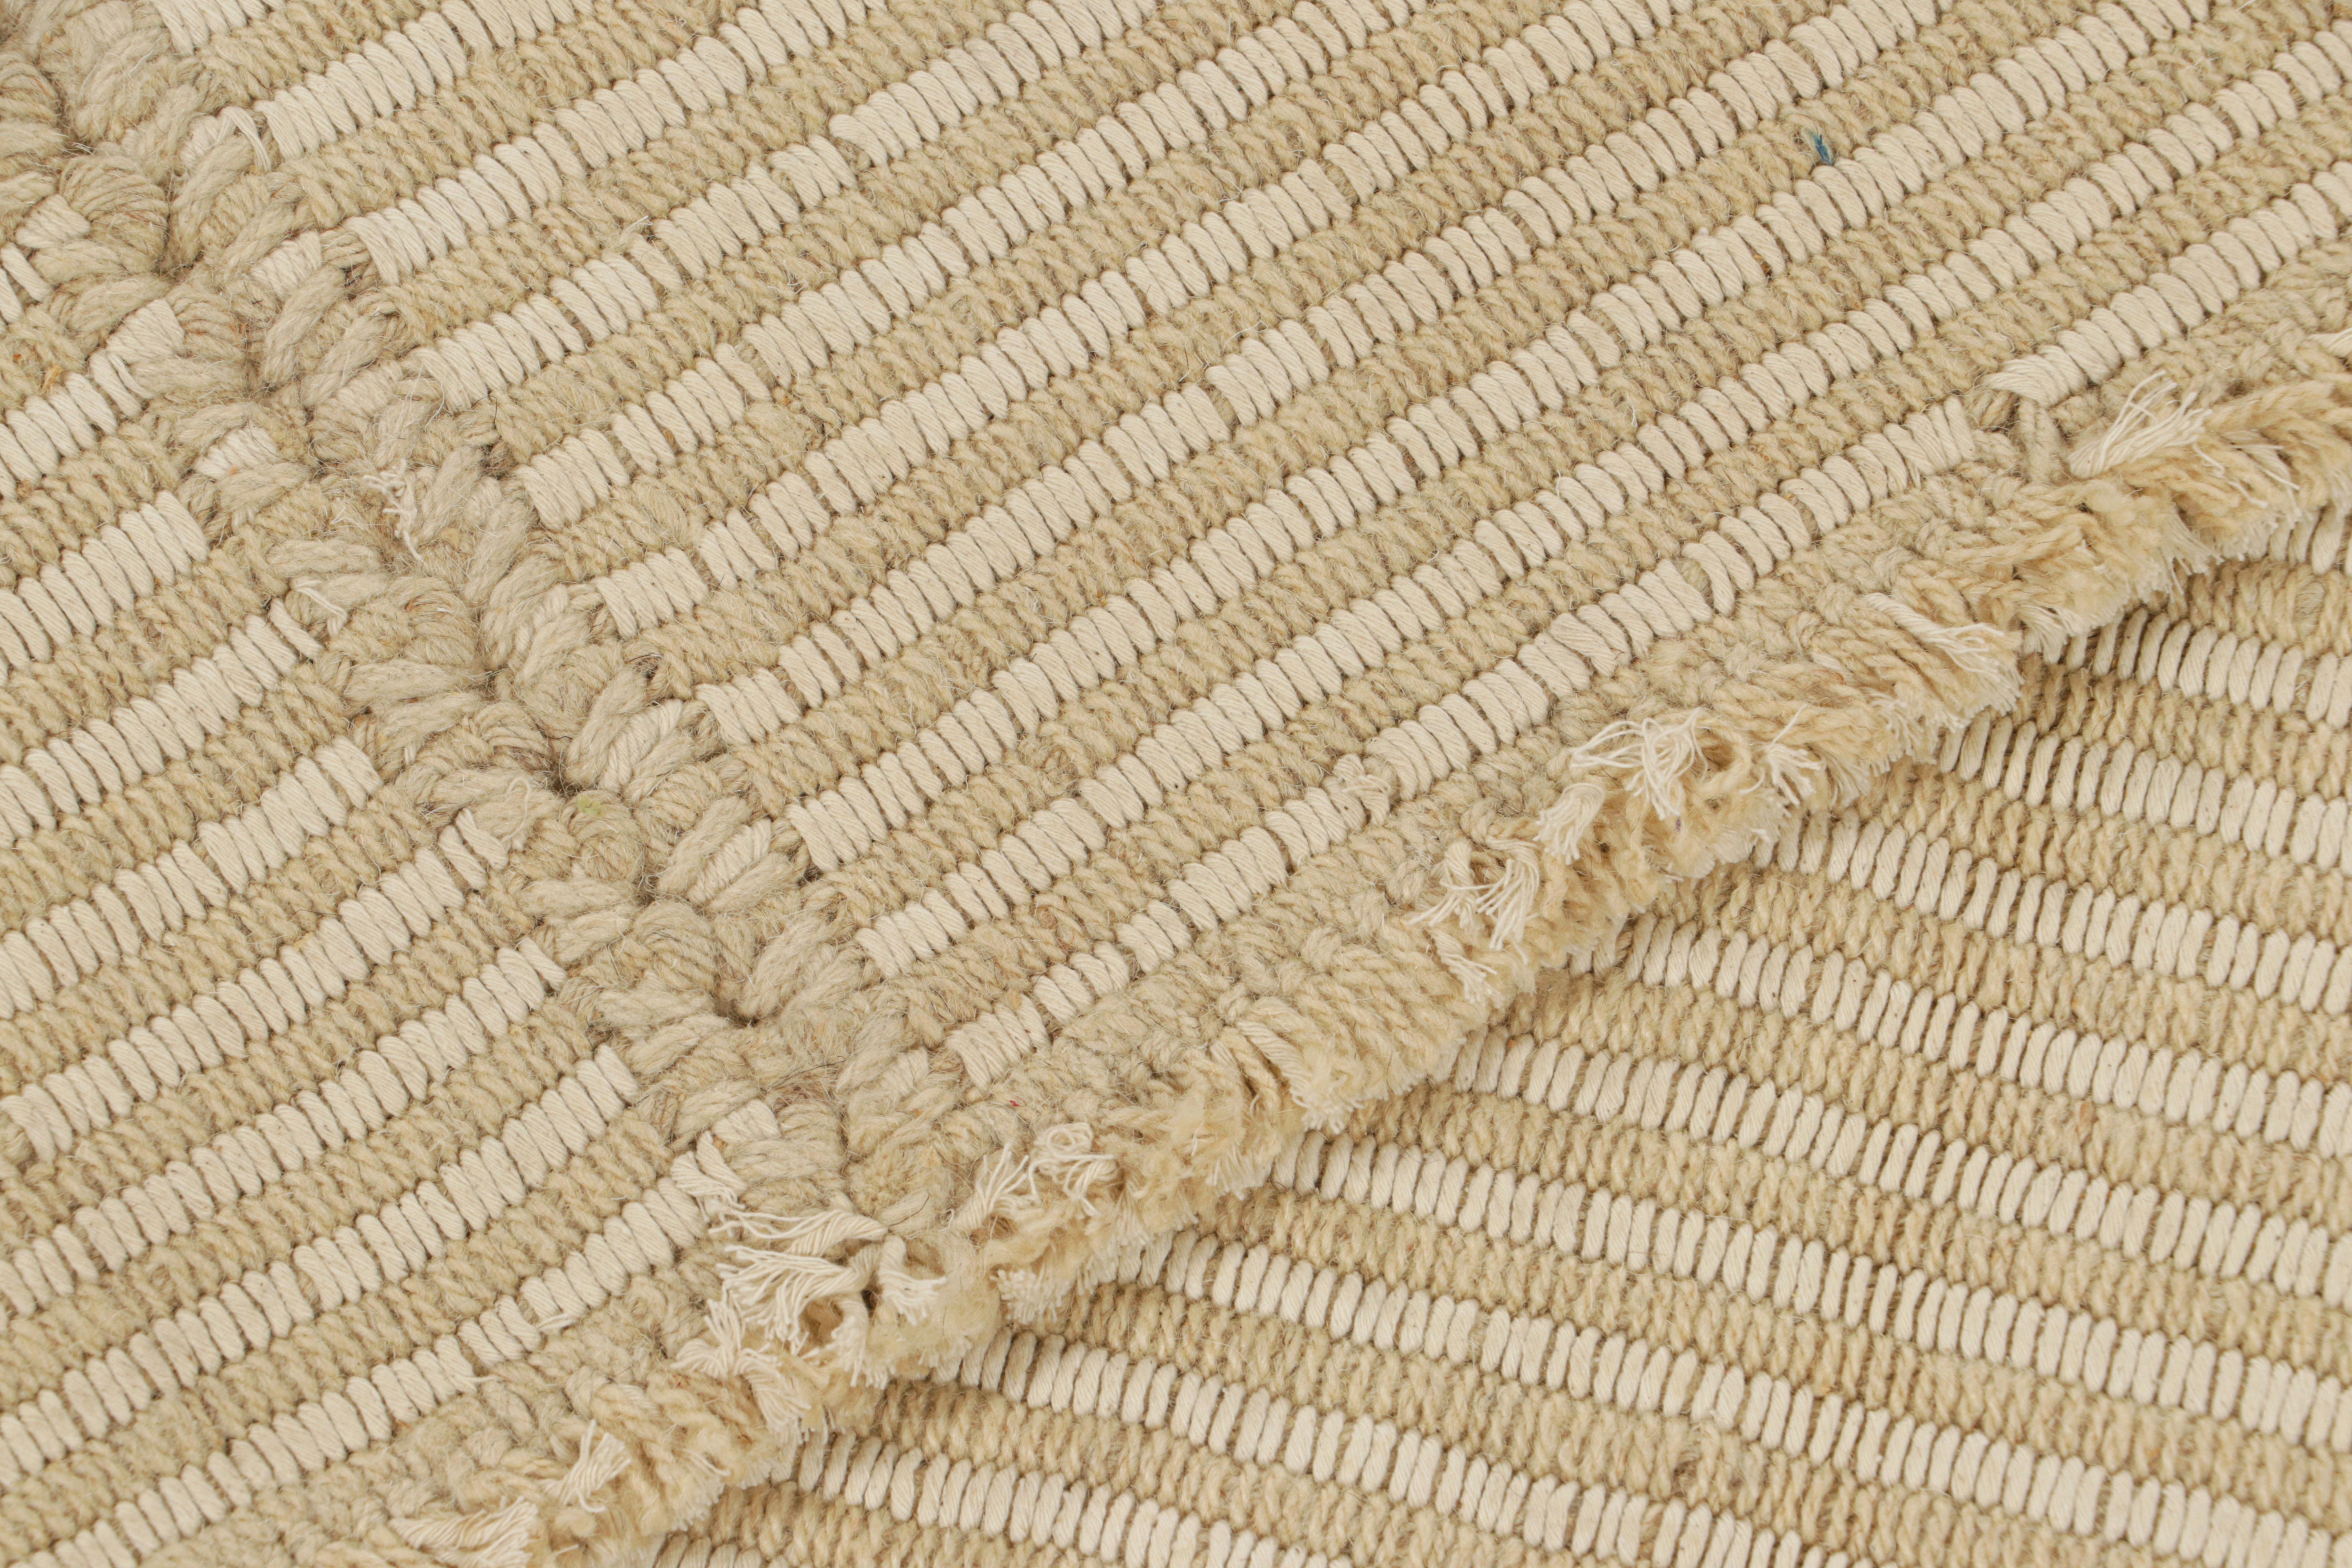 Wool Rug & Kilim’s Contemporary Kilim in Cream White and Beige Textural Stripes For Sale